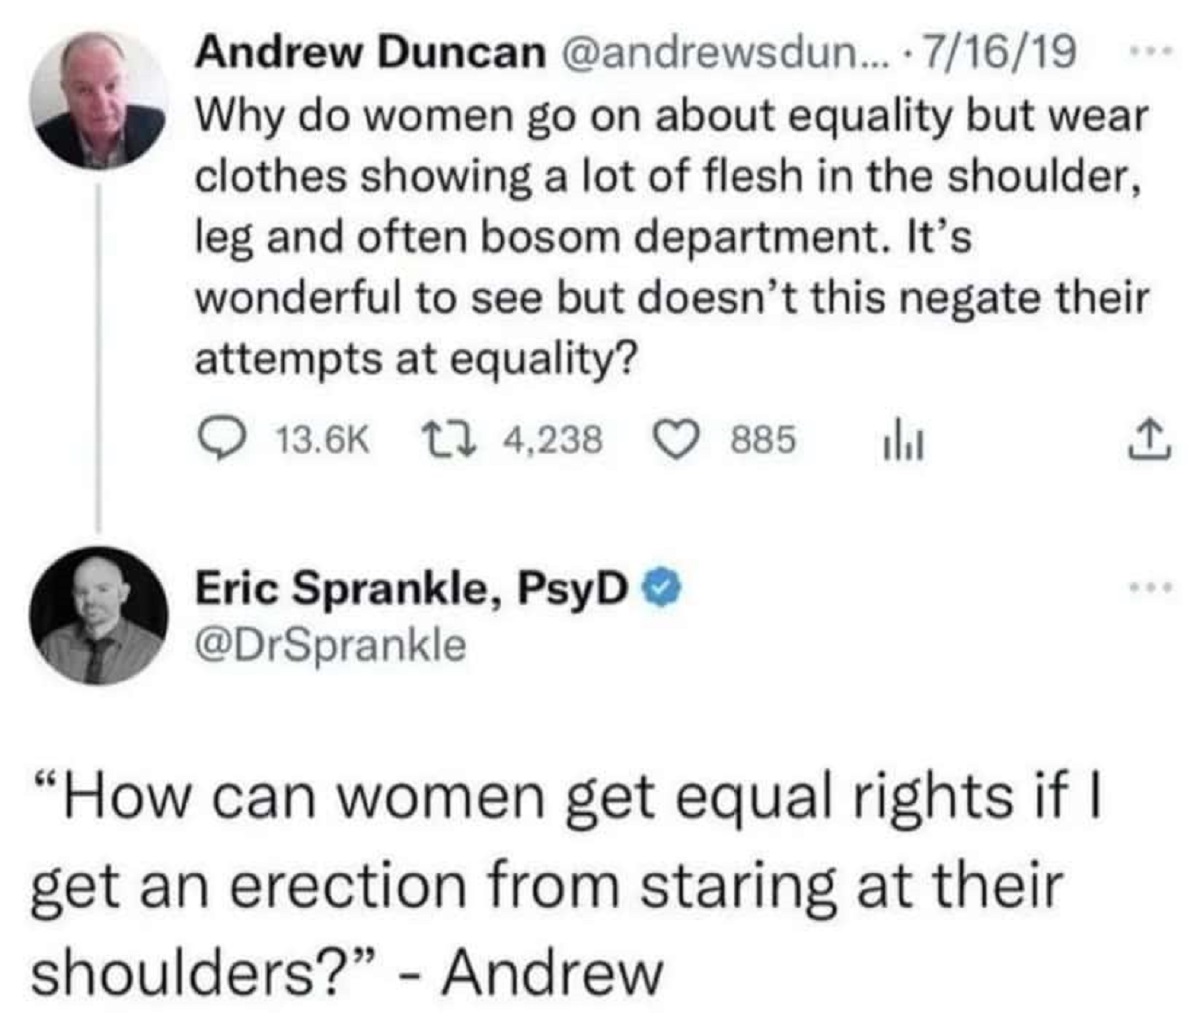 screenshot - Andrew Duncan ... . 71619 Why do women go on about equality but wear clothes showing a lot of flesh in the shoulder, leg and often bosom department. It's wonderful to see but doesn't this negate their attempts at equality? 4,238 885 h Eric Sp